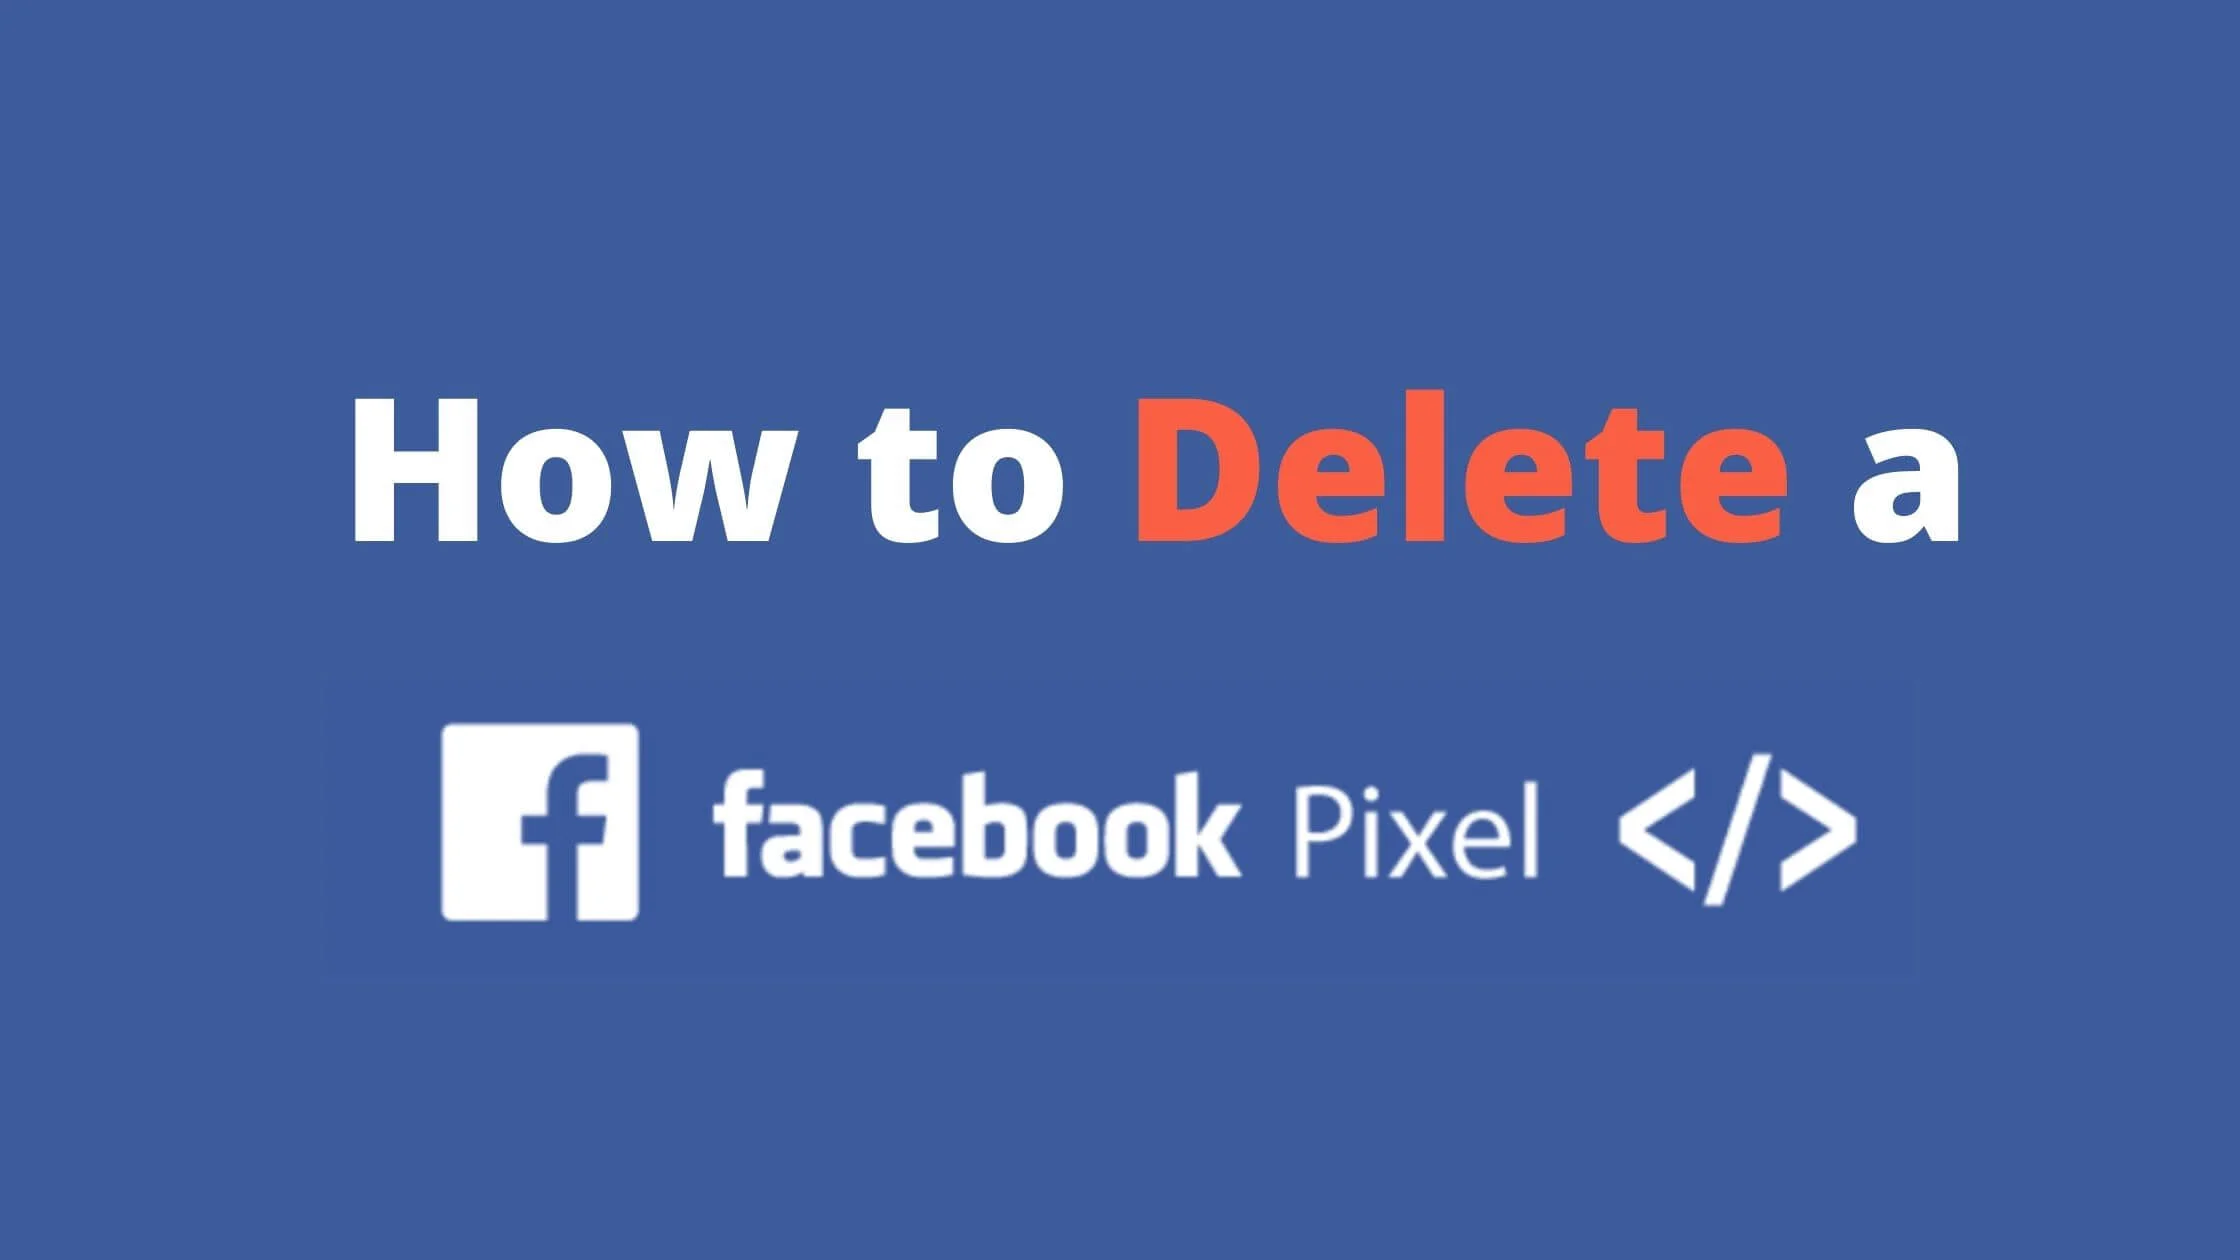 How to Delete a Facebook Pixel